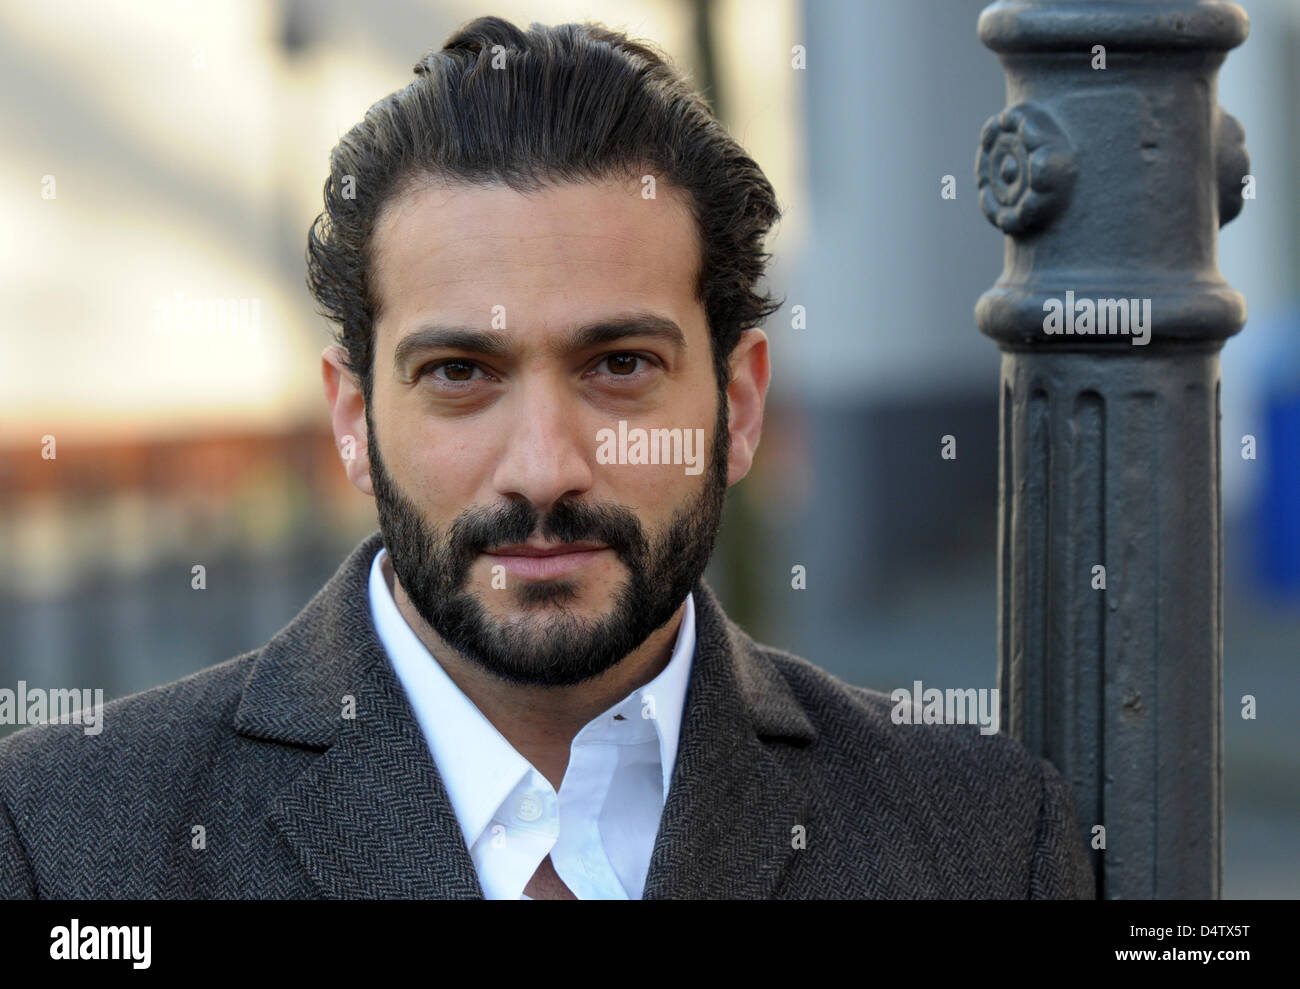 Turkish actor Erhan Emre poses for photographers during the shooting of the thriller 'Takiye - Im Namen Gottes' (litt. 'Takiye - In the Name of God')in Duisburg, Germany, 30 November 2009. The film tells the story of a Turkish family breaking apart as it becomes involved in a criminal organistaion claiming to act in the name of god. The film is scheduled to be aired in autumn 2010  Stock Photo